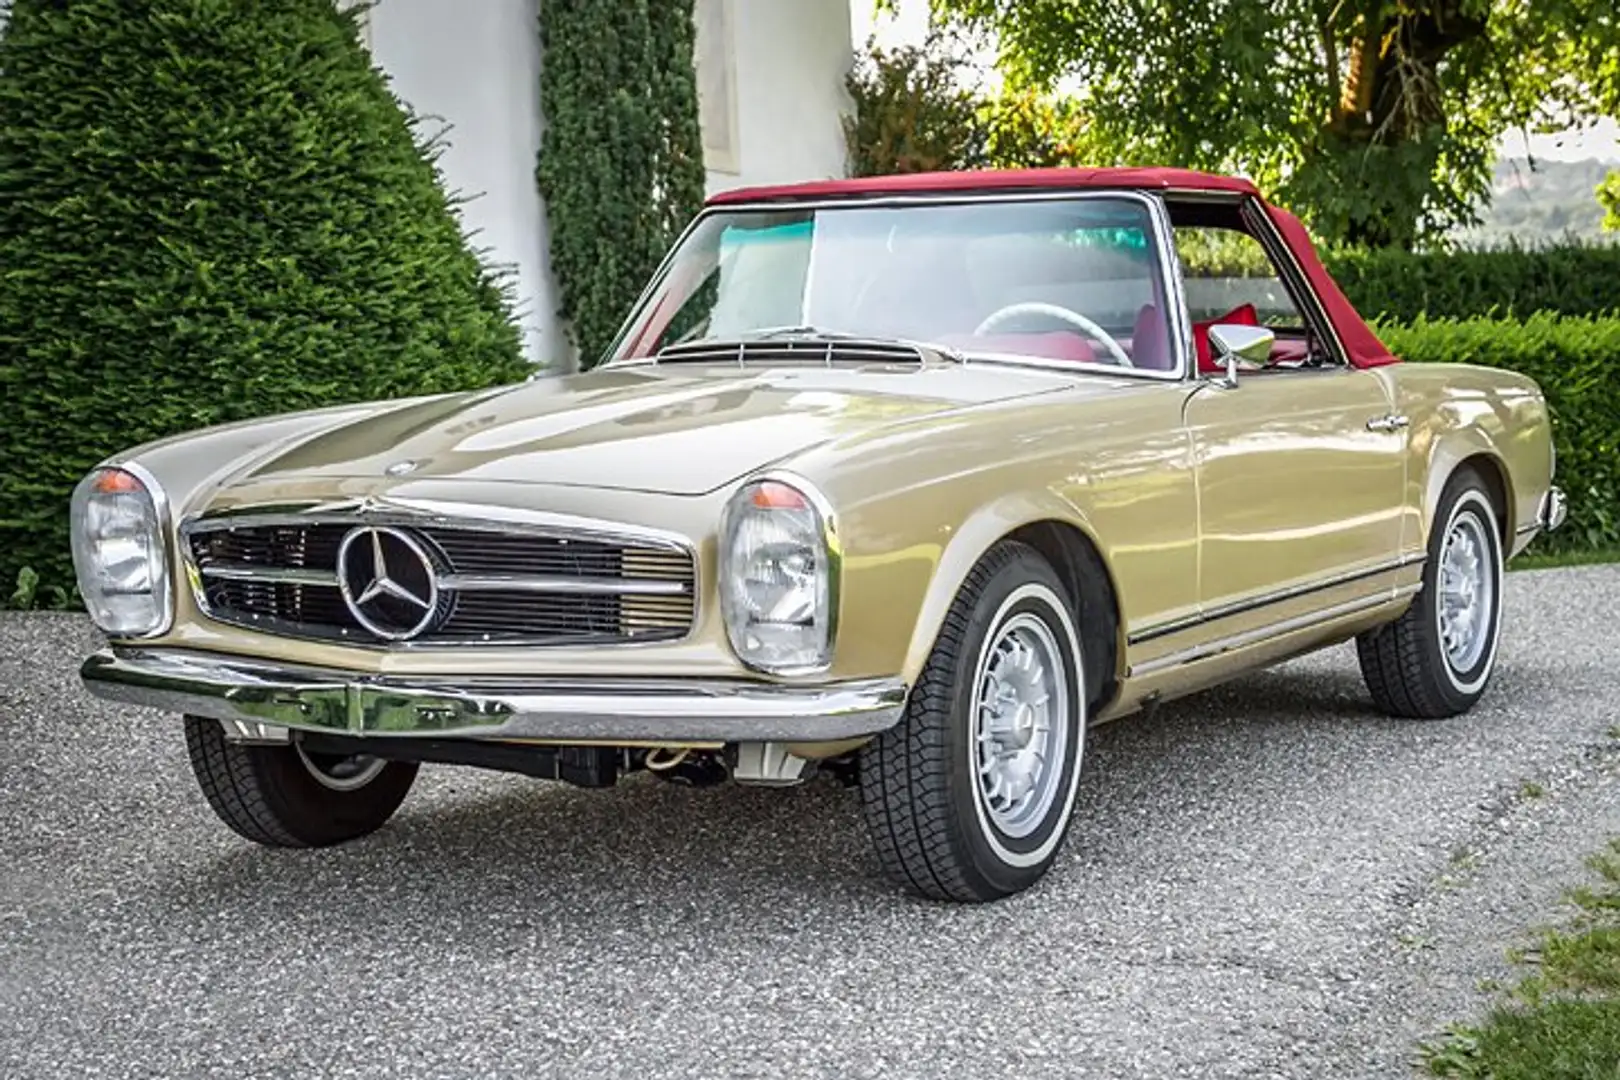 Mercedes-Benz SL 280 "Pagode" Cabriolet (matching numbers) Gold - 1